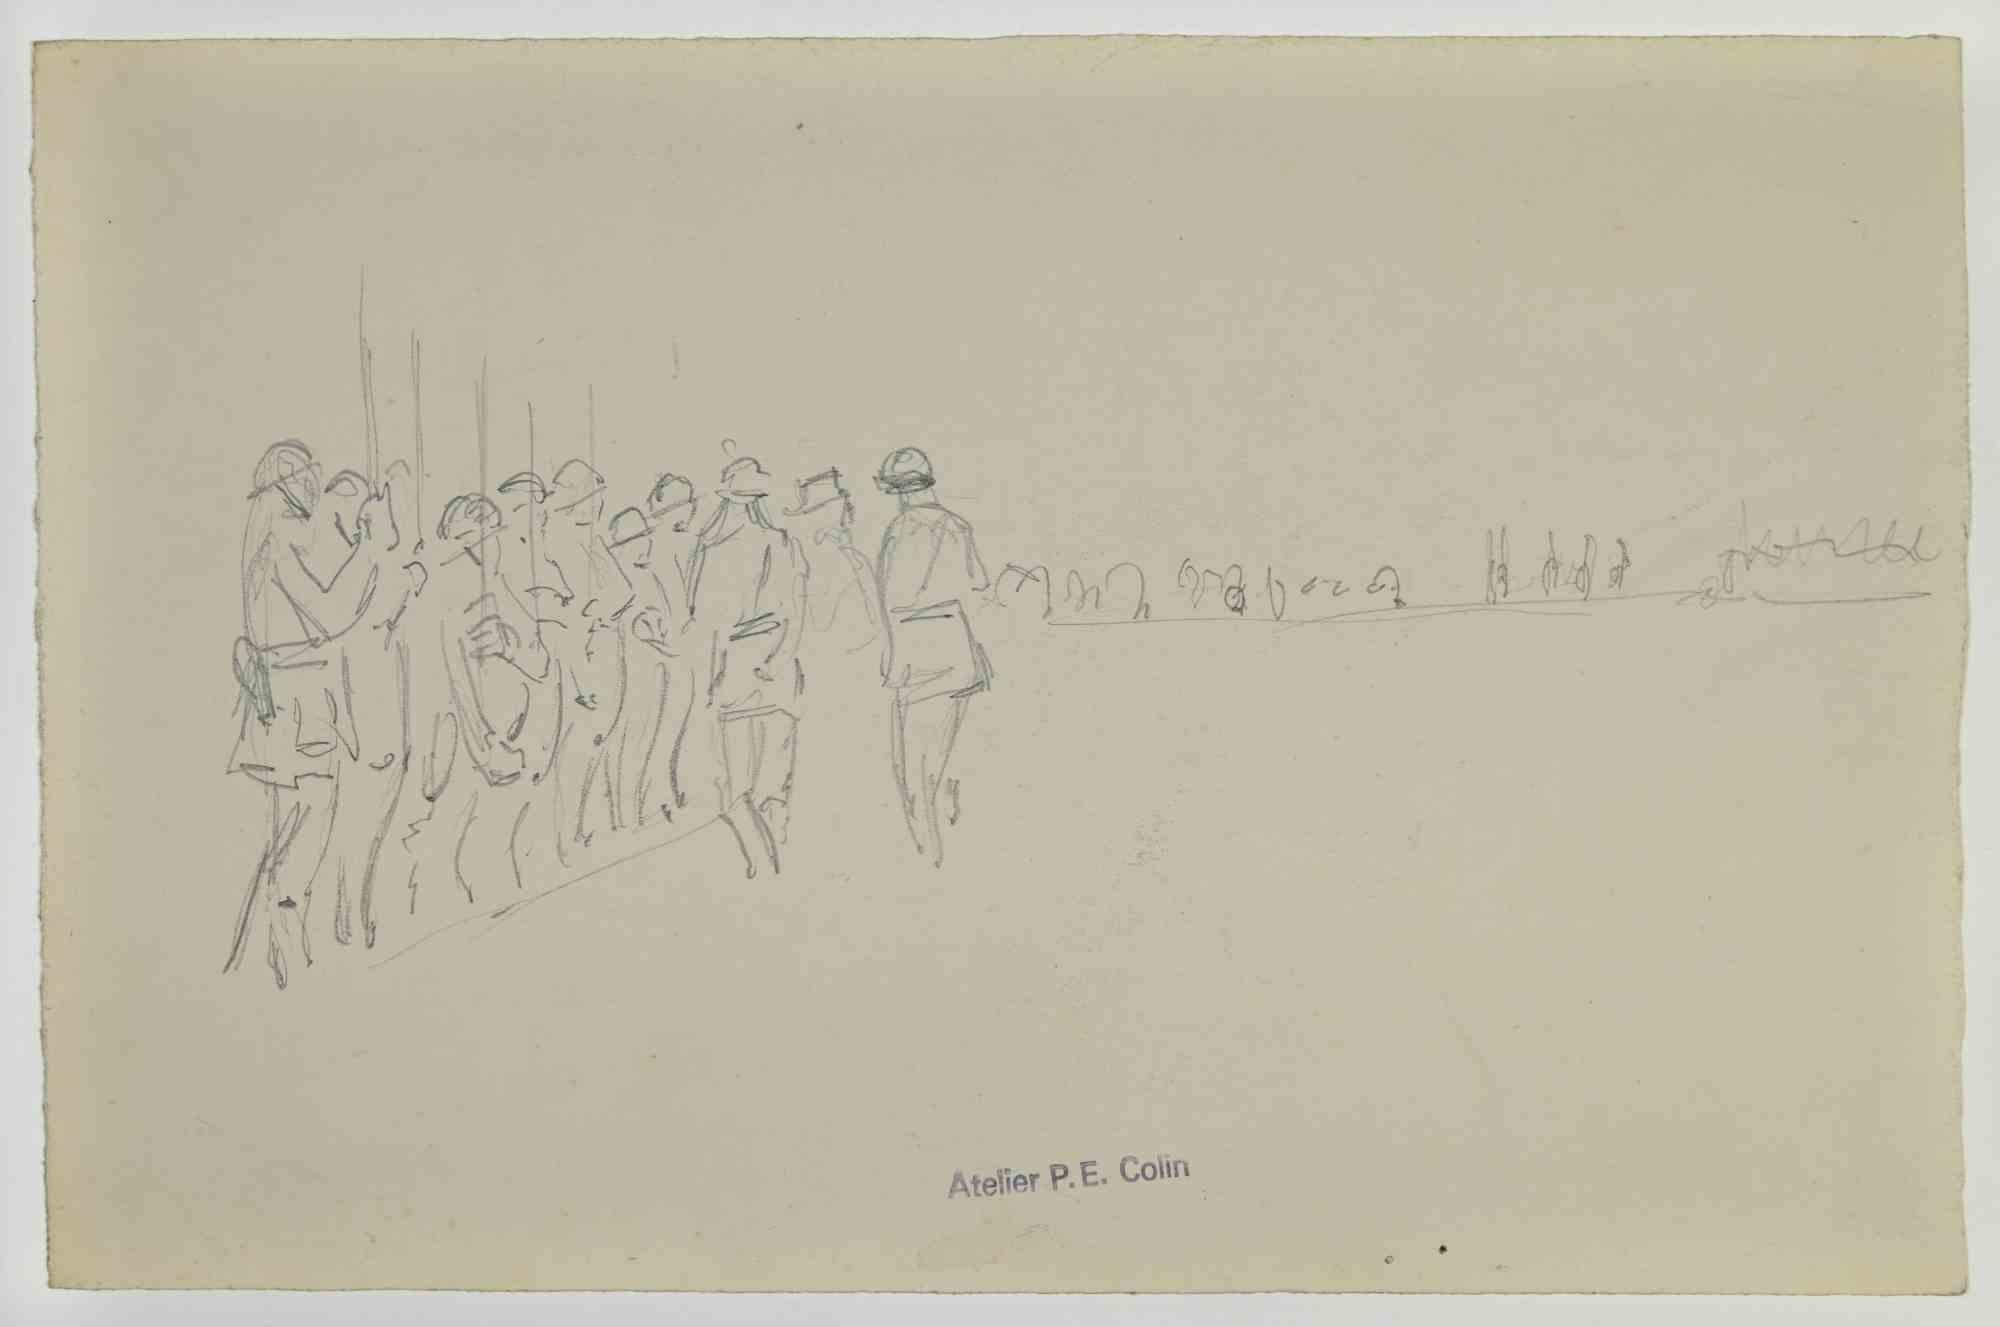 Soldiers in the lines is a drawing realized by Paul Emile Colin in the Early 20th Century.

Carbon Pencil on ivory-colored paper

Stamped on the lower.

Good conditions with slight foxing.

The artwork is realized through deft expressive strokes.